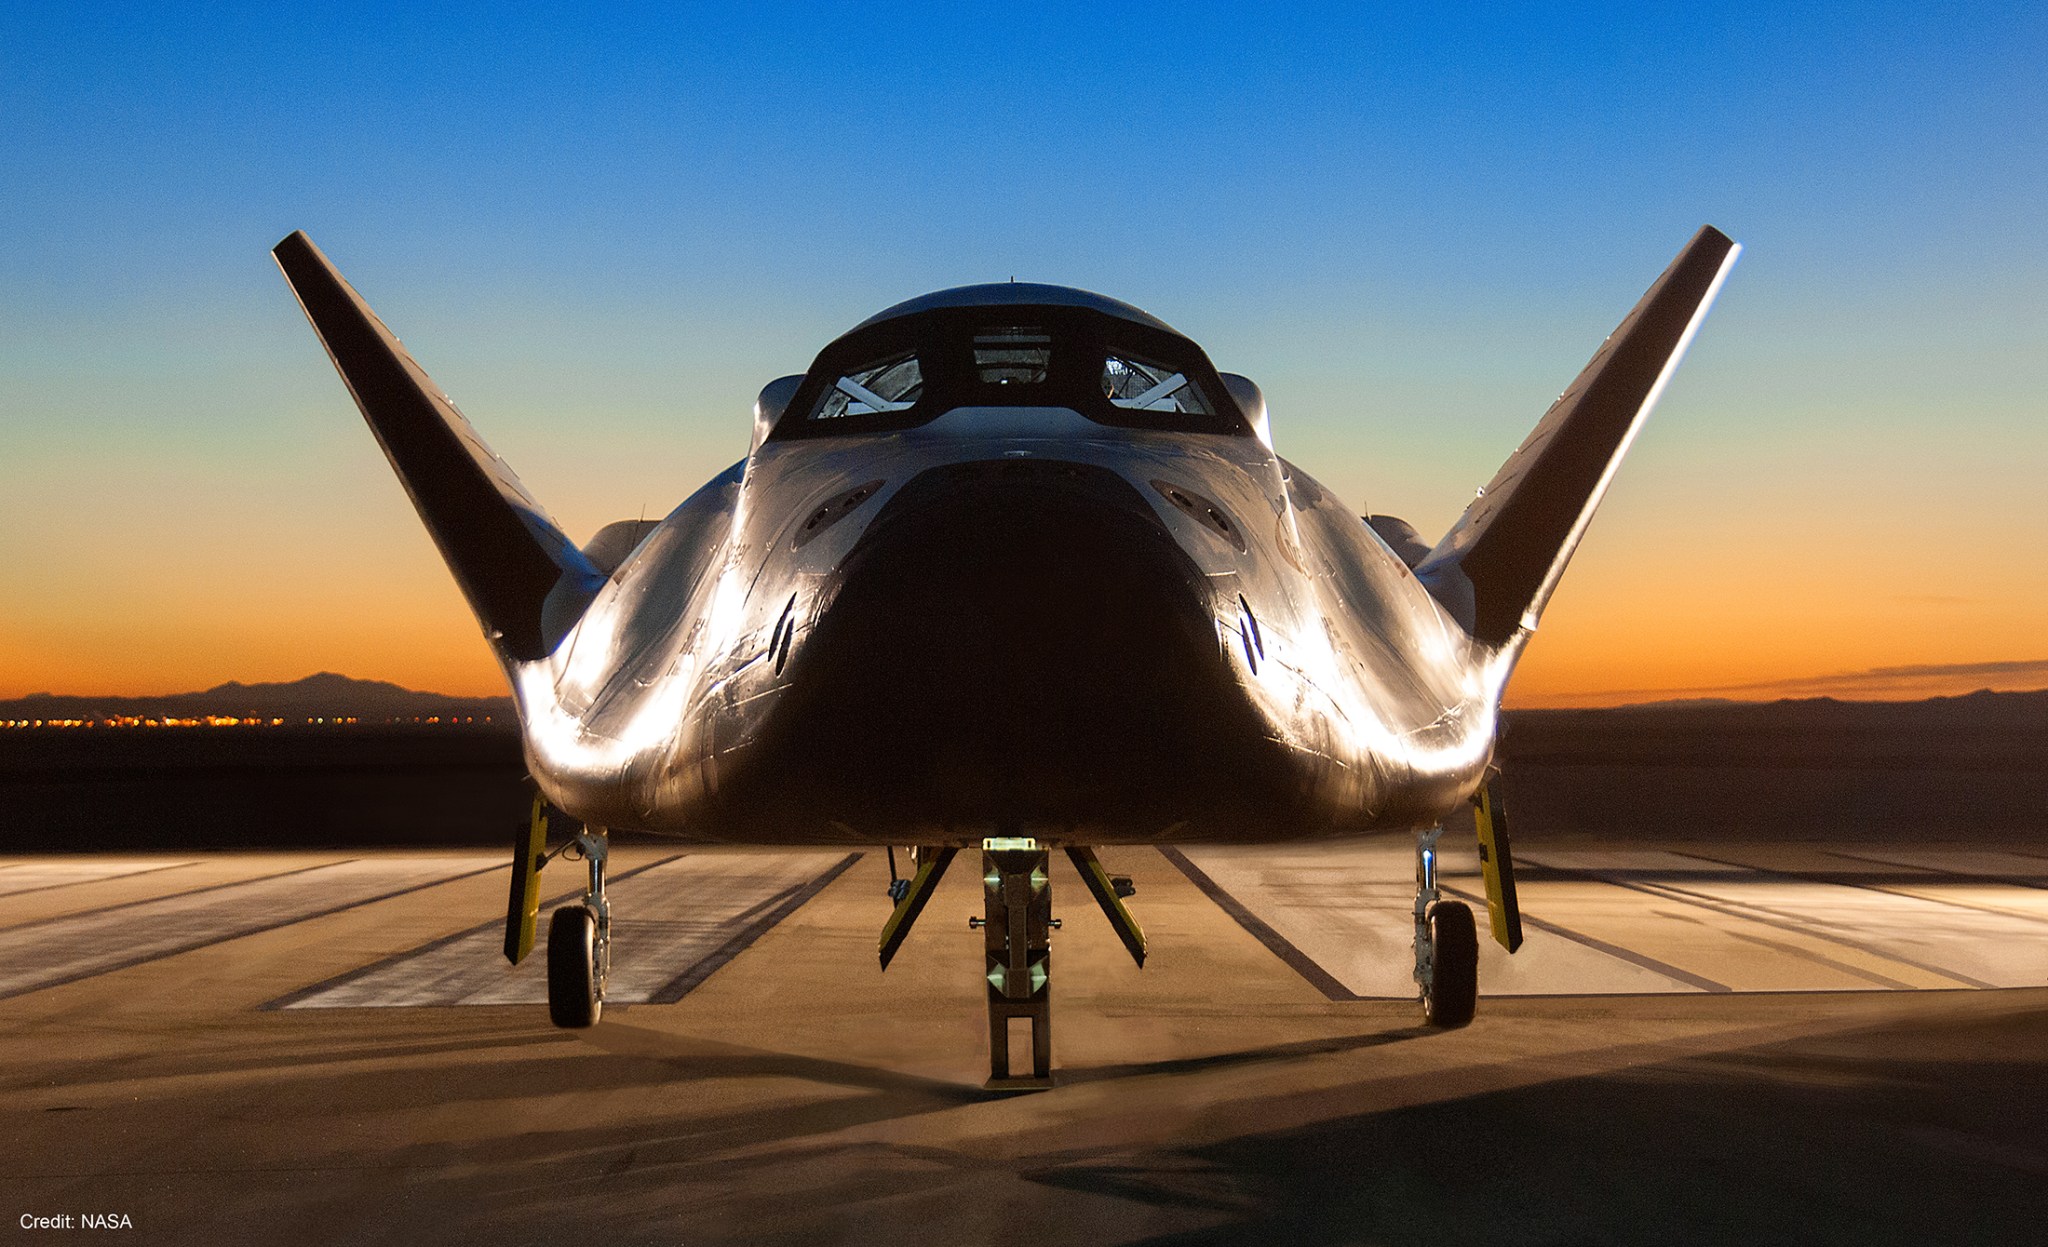 The Dream Chaser photographed at dawn on the NASA Armstrong Research Center runway.